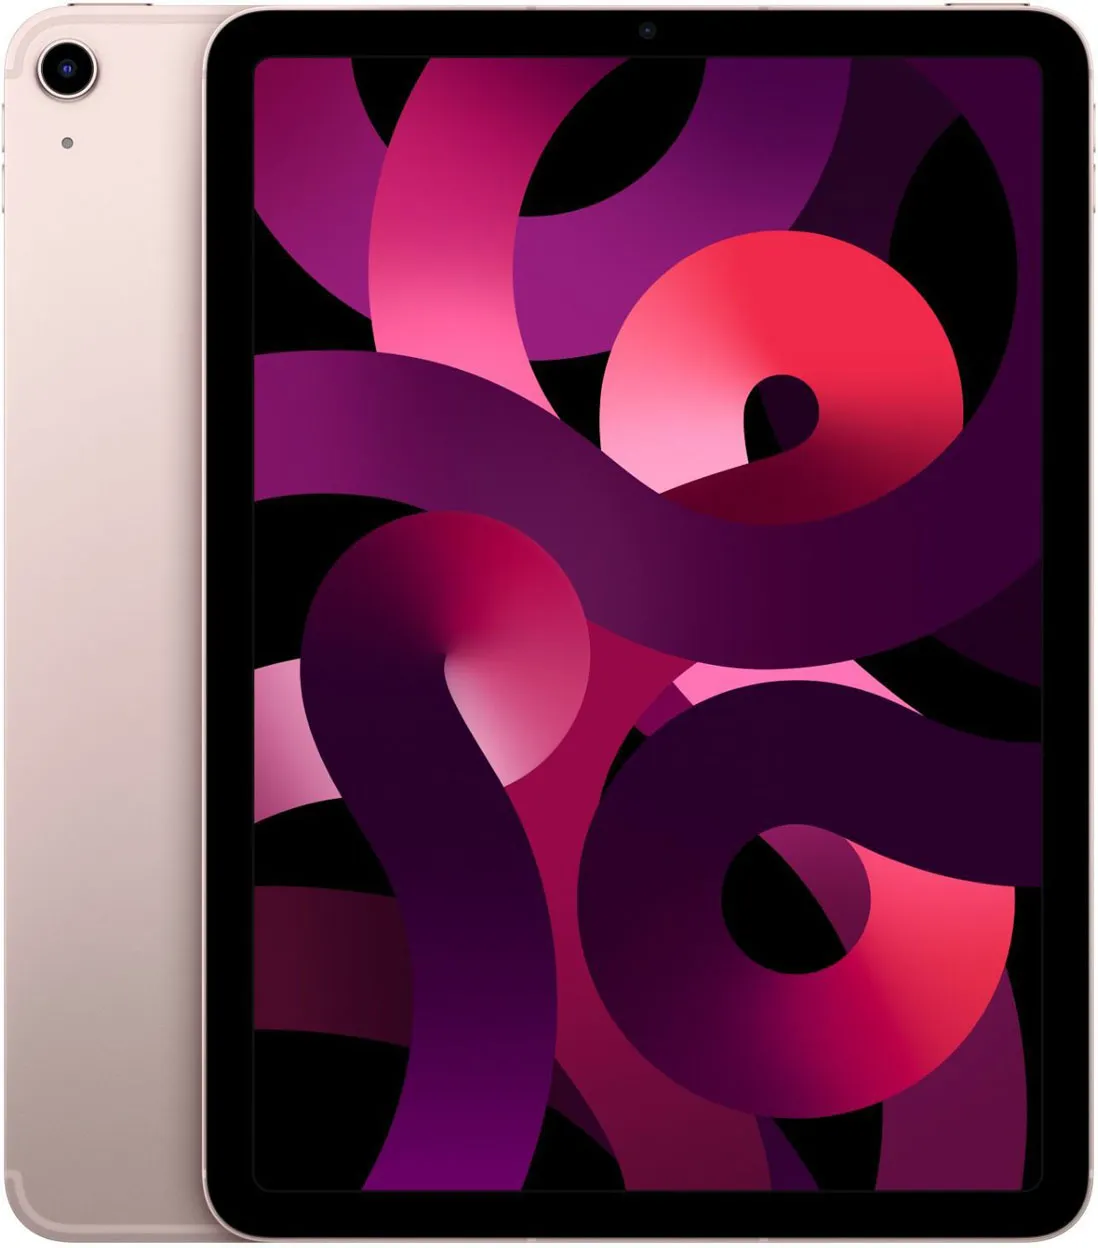 Apple iPad Air (5th Generation): with M1 chip, 27.69 cm (10.9″) Liquid Retina Display, 64GB, Wi-Fi 6 + 5G Cellular, 12MP front/12MP Back Camera, Touch ID, All-Day Battery Life – Space Gray